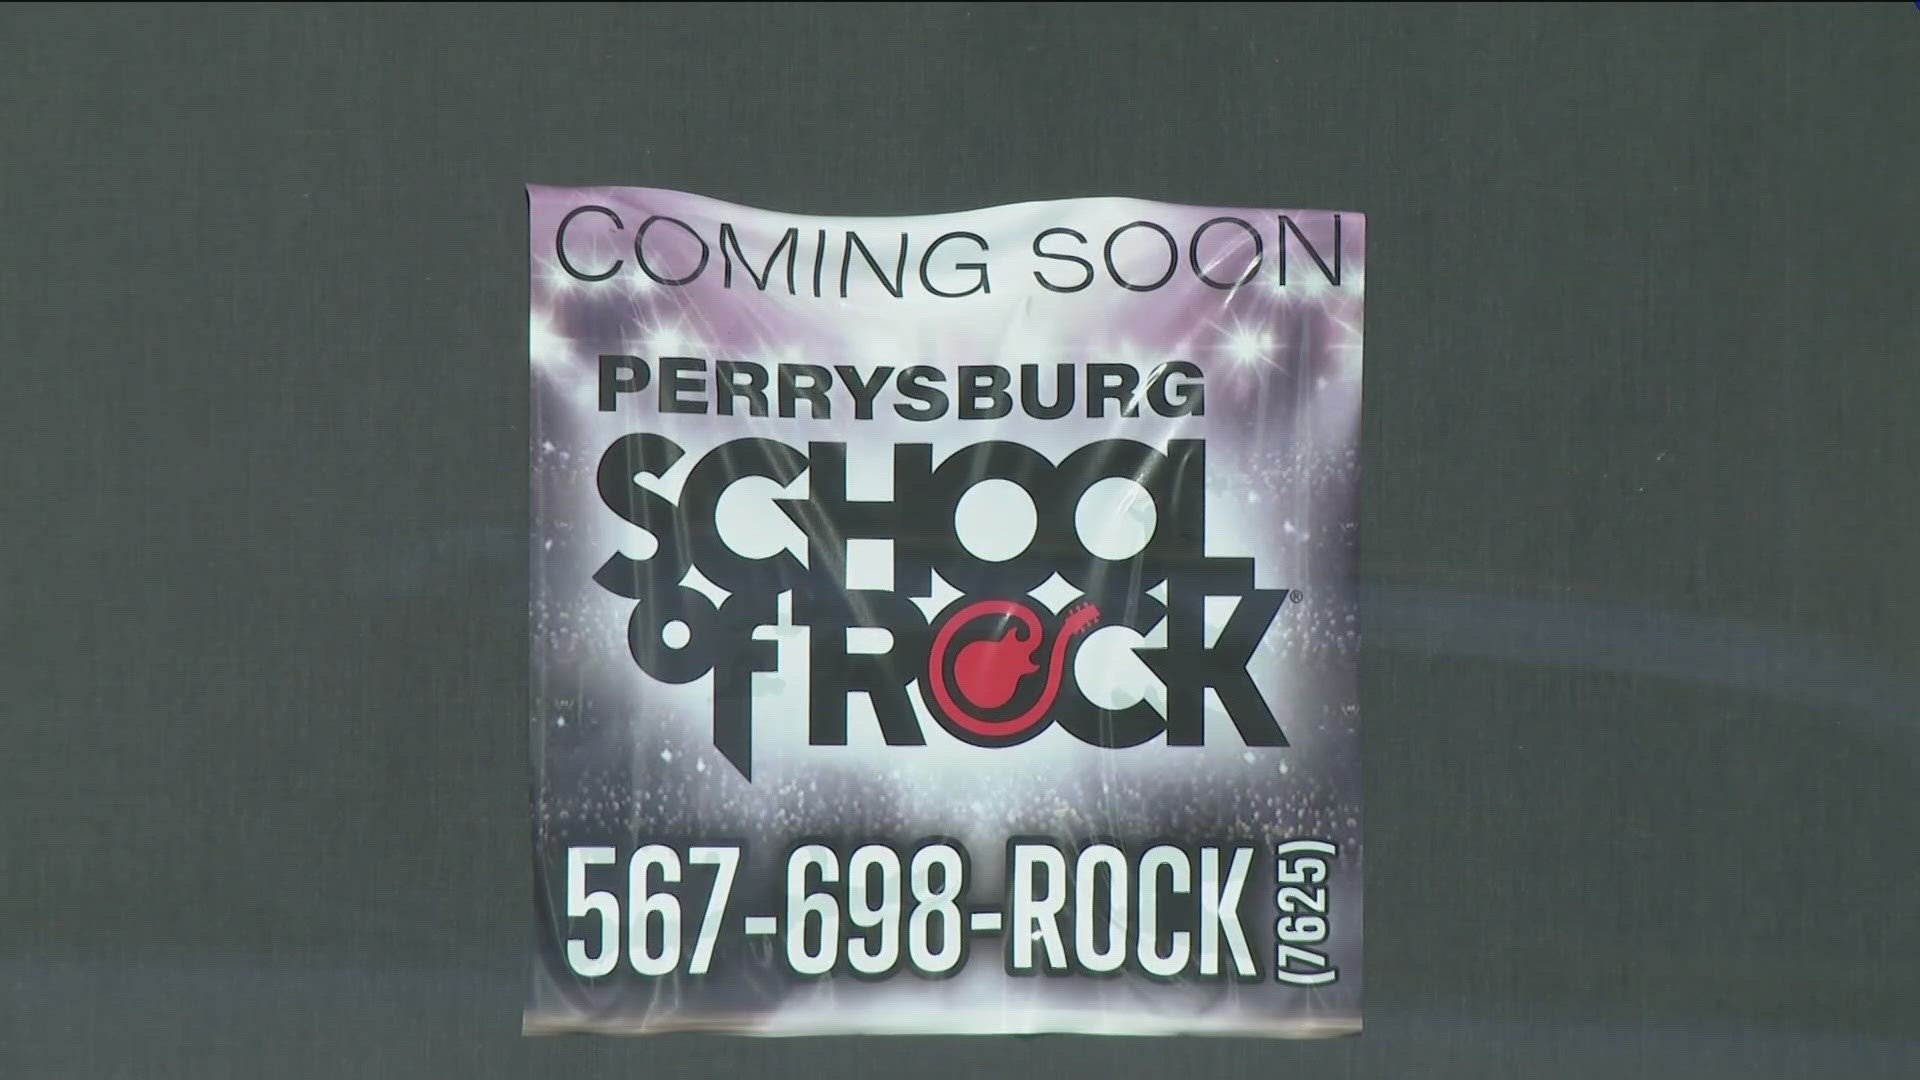 Ron Rothenbuhler is opening a 'School of Rock' franchise at Levis Commons where kids can learn rock instruments like drums, guitar, bass, and singing.